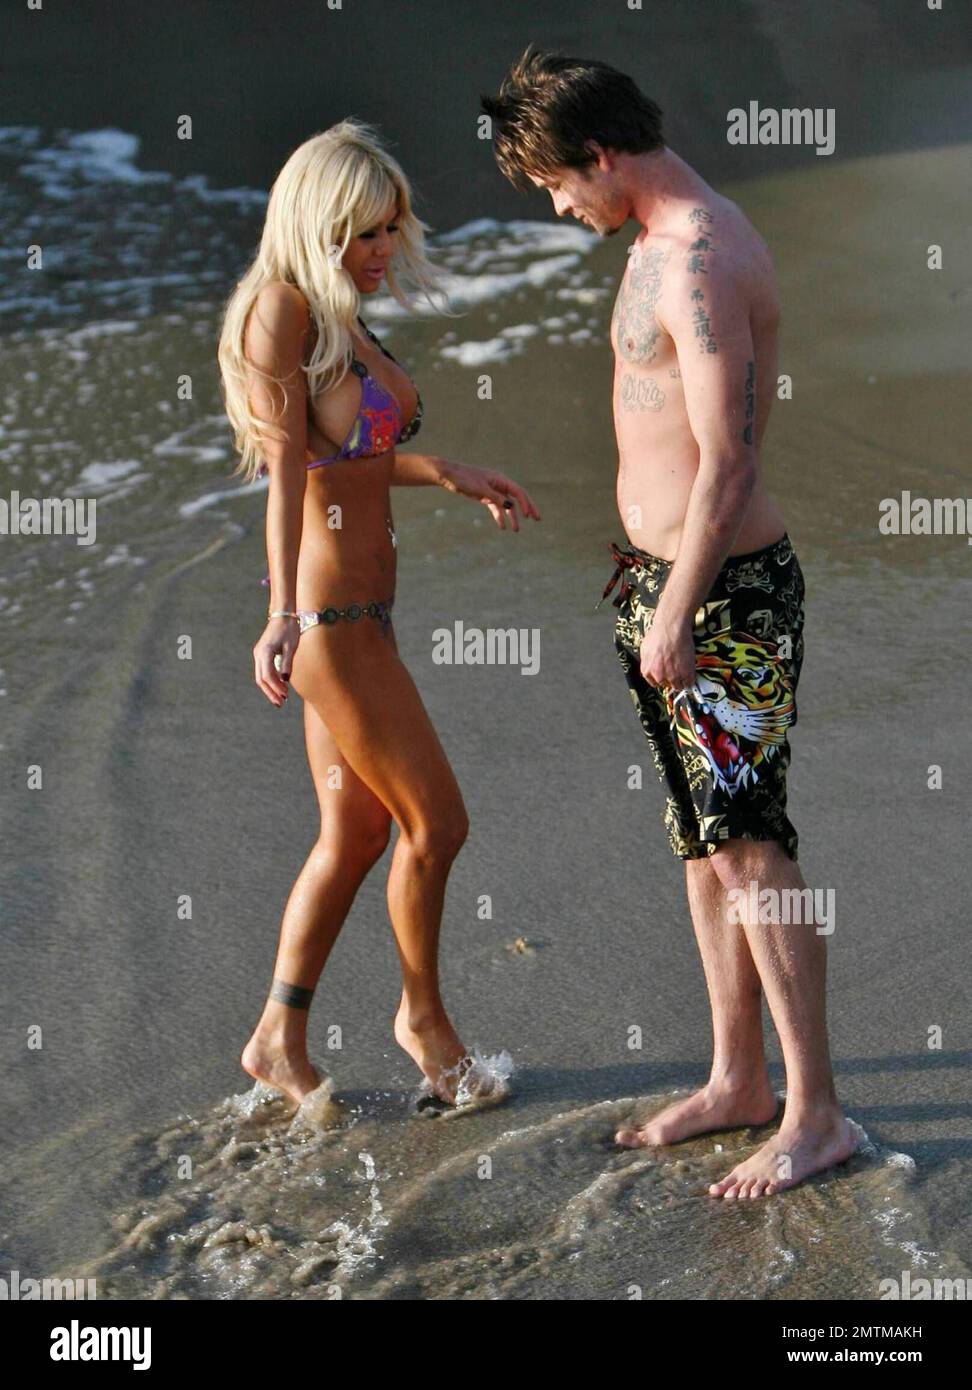 Exclusive!! Actress, Playboy Playmate and upcoming reality tv star Shauna Sand enjoys a day at the beach with new beau, chrome hearts model Greg Knudson image